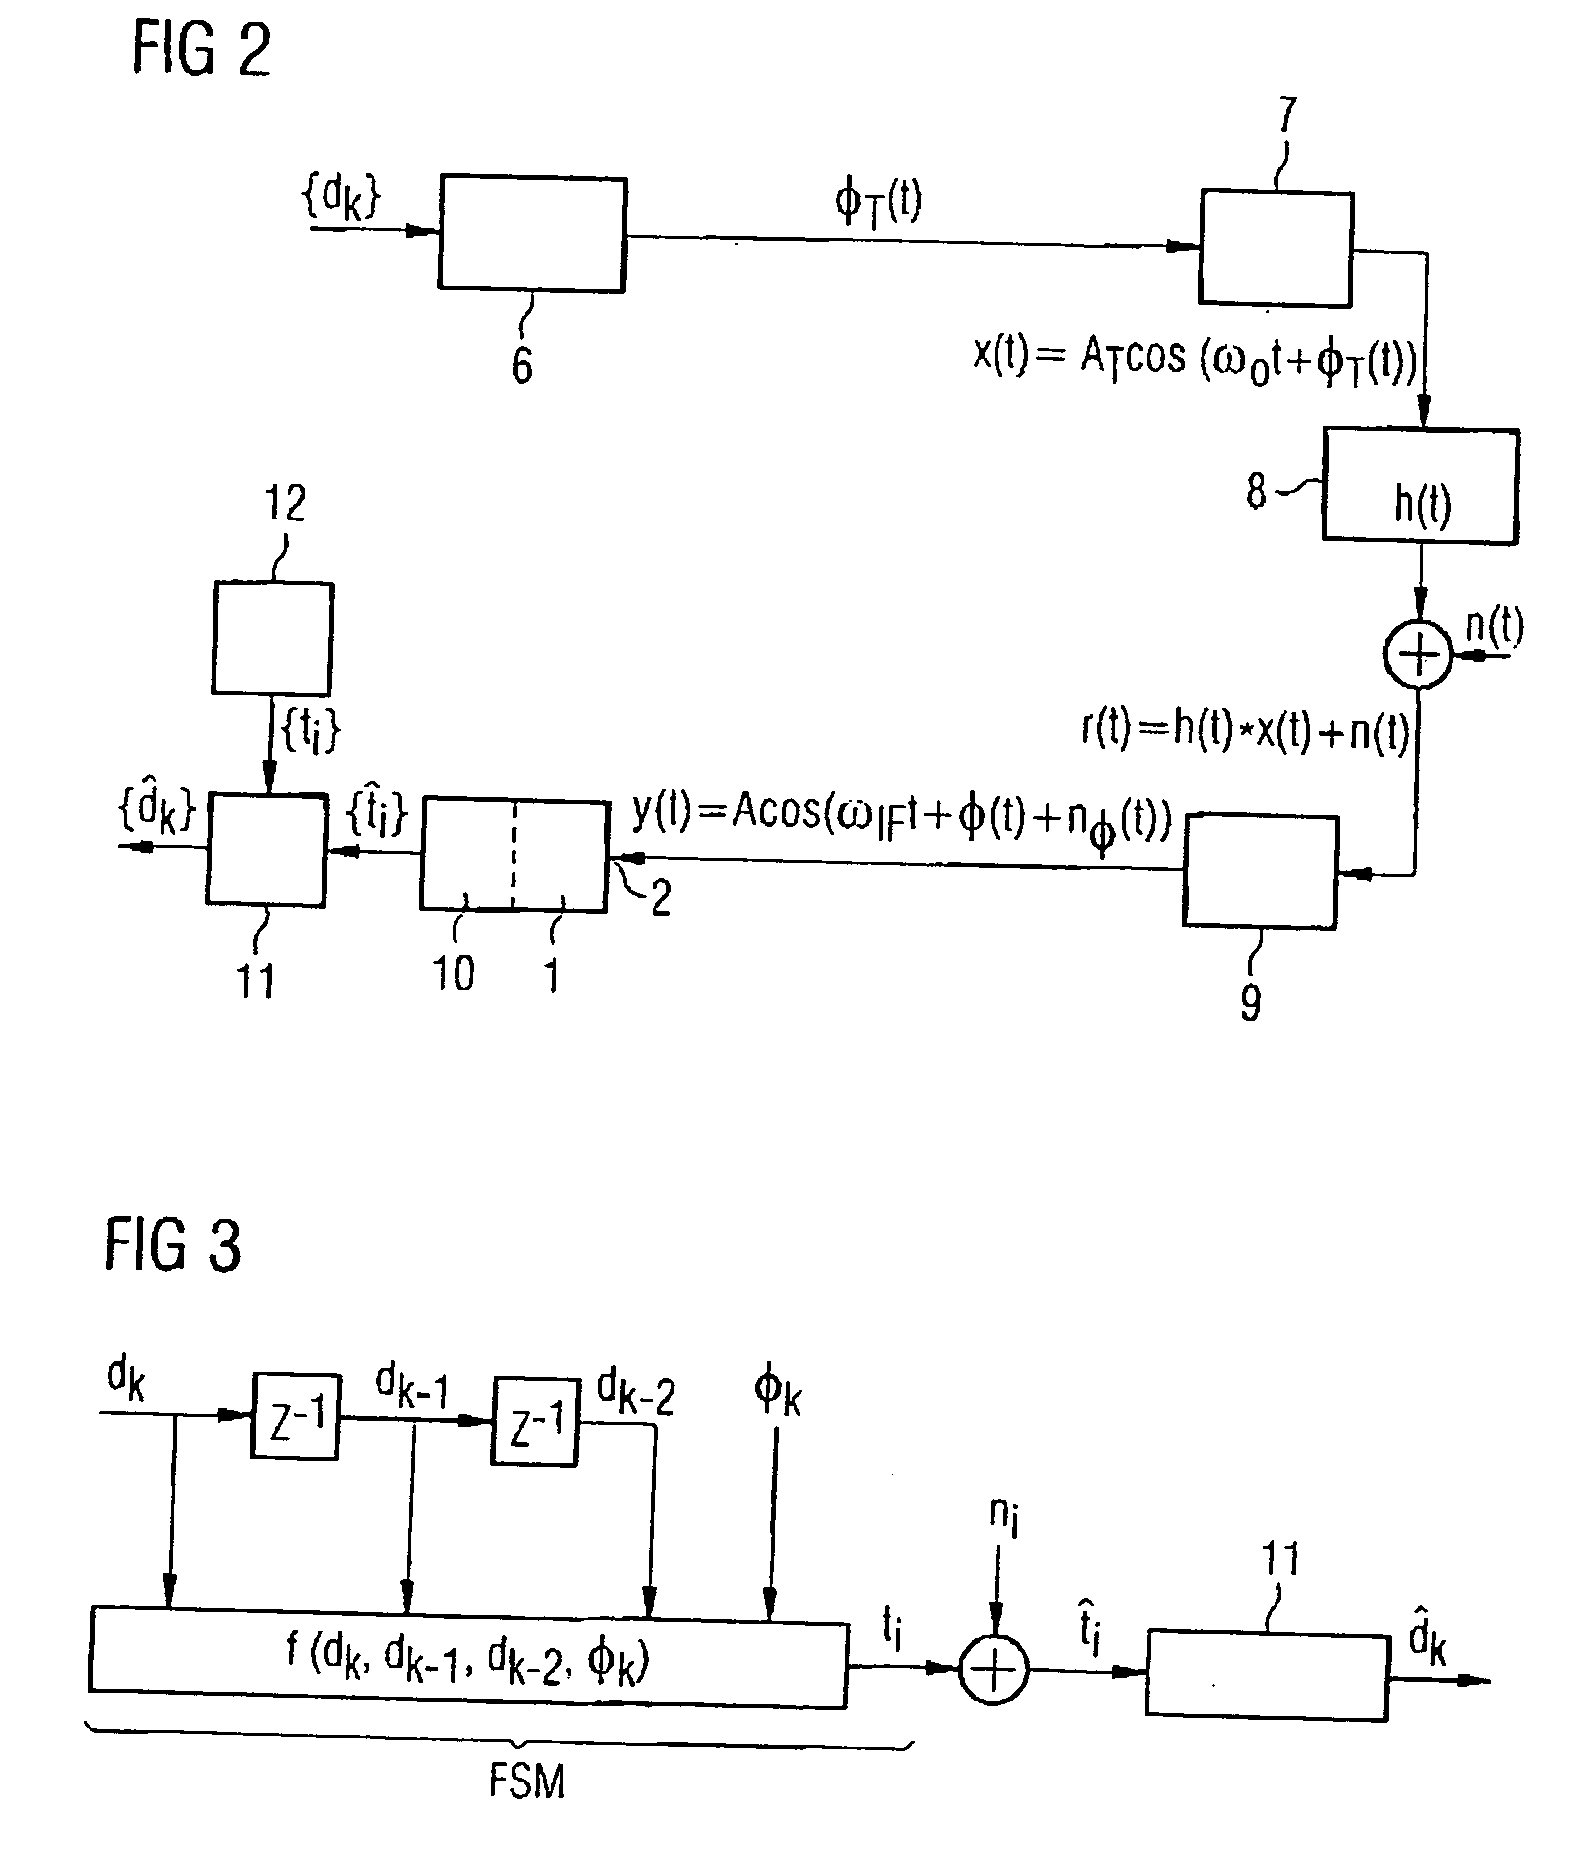 Method and device for calculating zero-crossing reference sequences for signal detection of angle-modulated signals based on zero crossings of the received signal